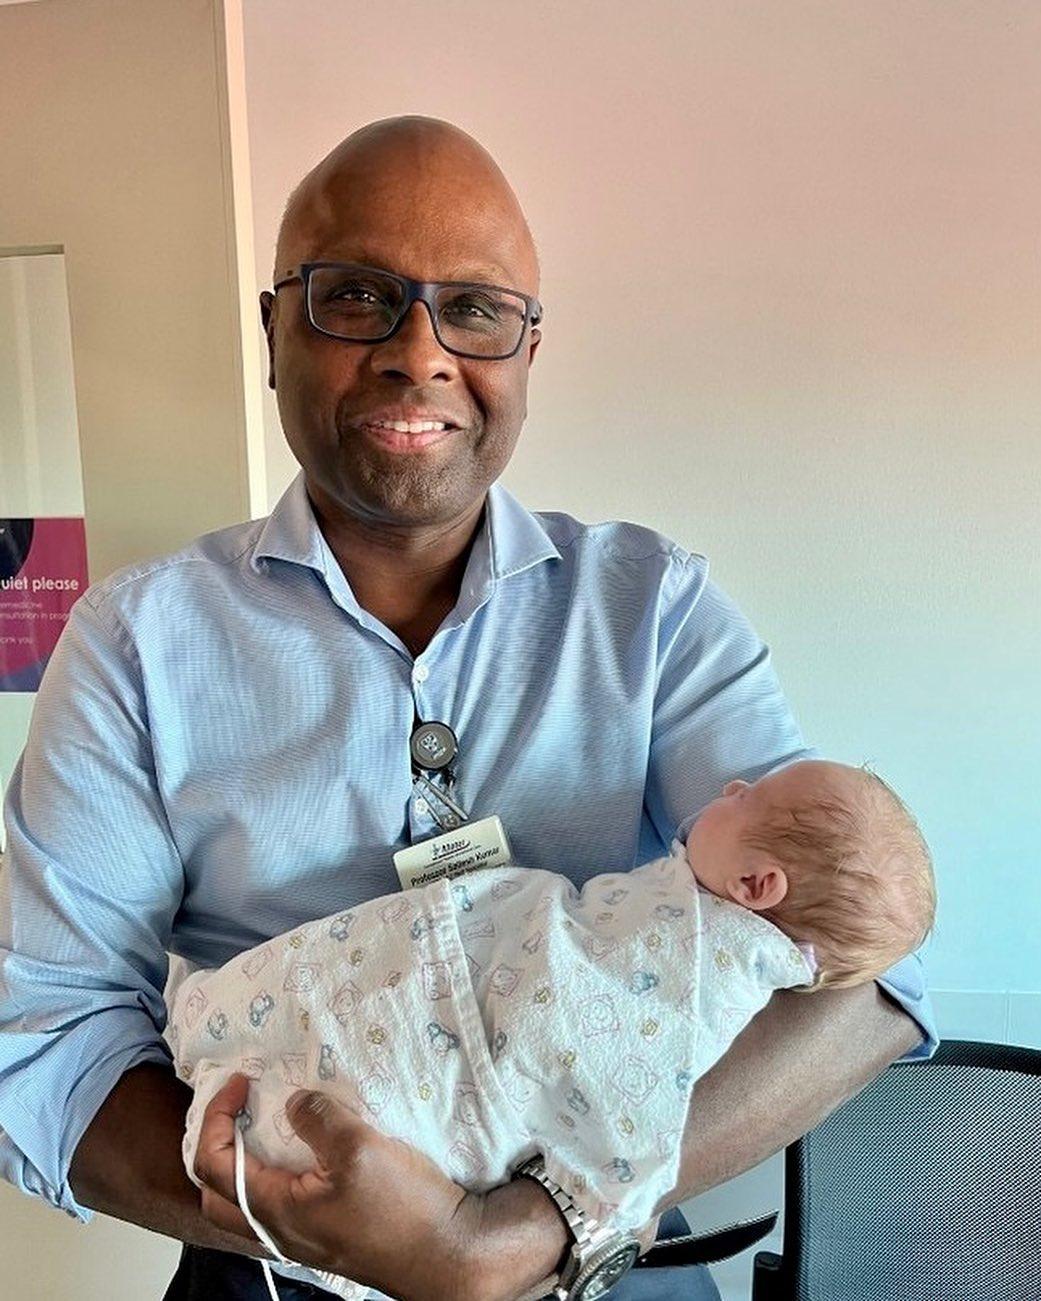 Professor Sailesh Kumar of Mater Maternal Fetal Medicine Unit with baby Saylor. (Courtesy of <a href="https://www.facebook.com/MaterMothers/">Mater Mothers</a>)